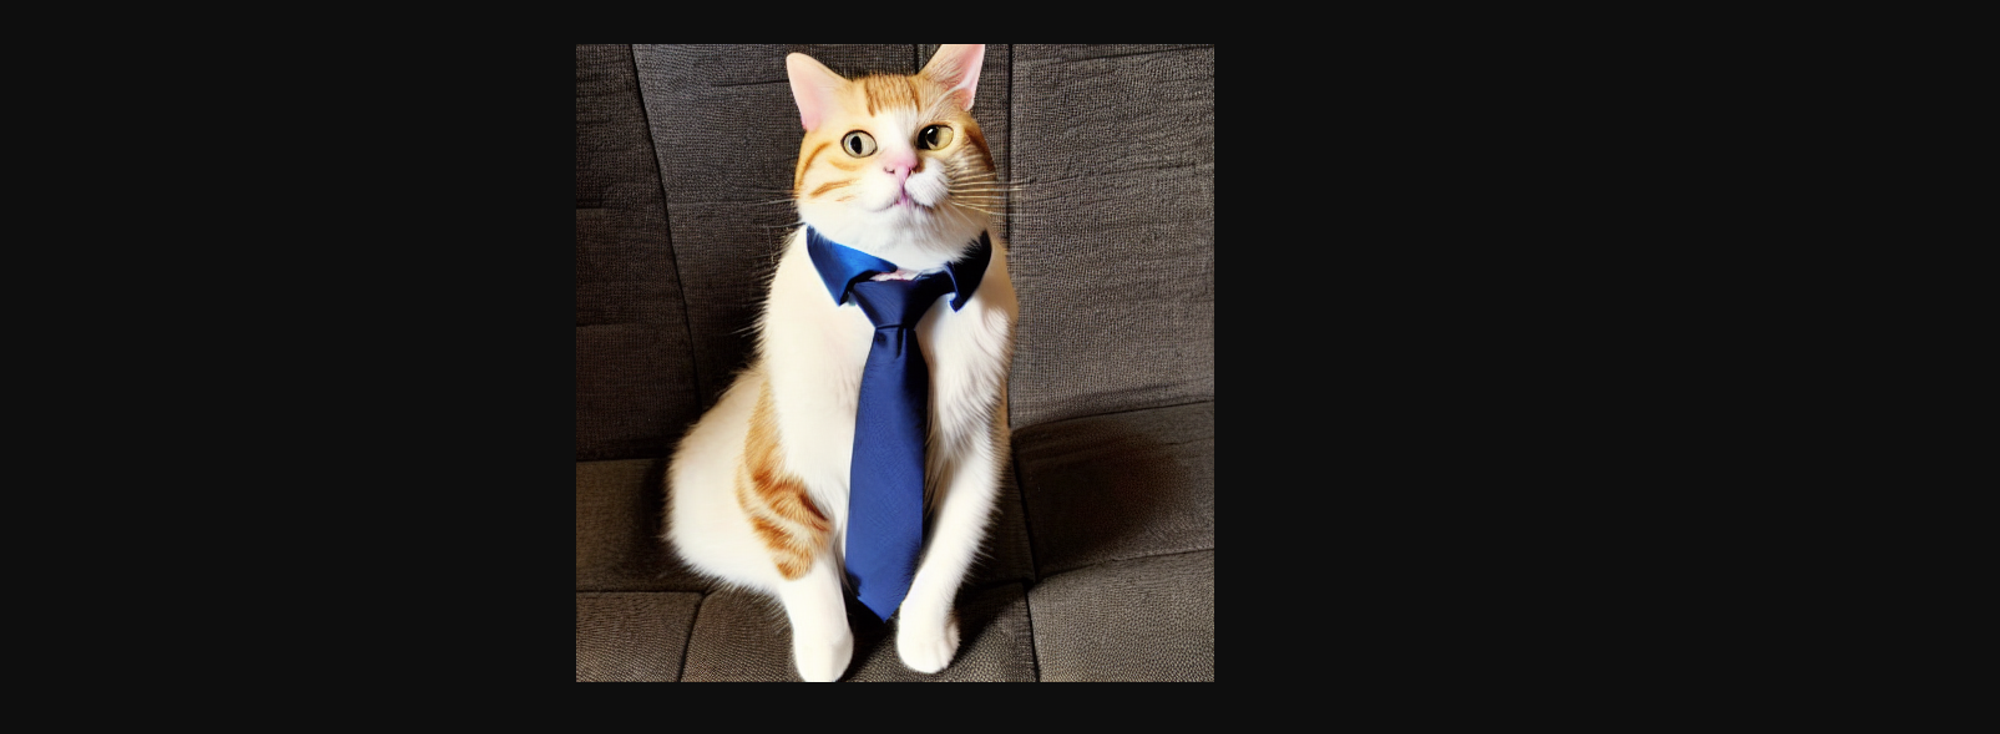 A cat in a suit